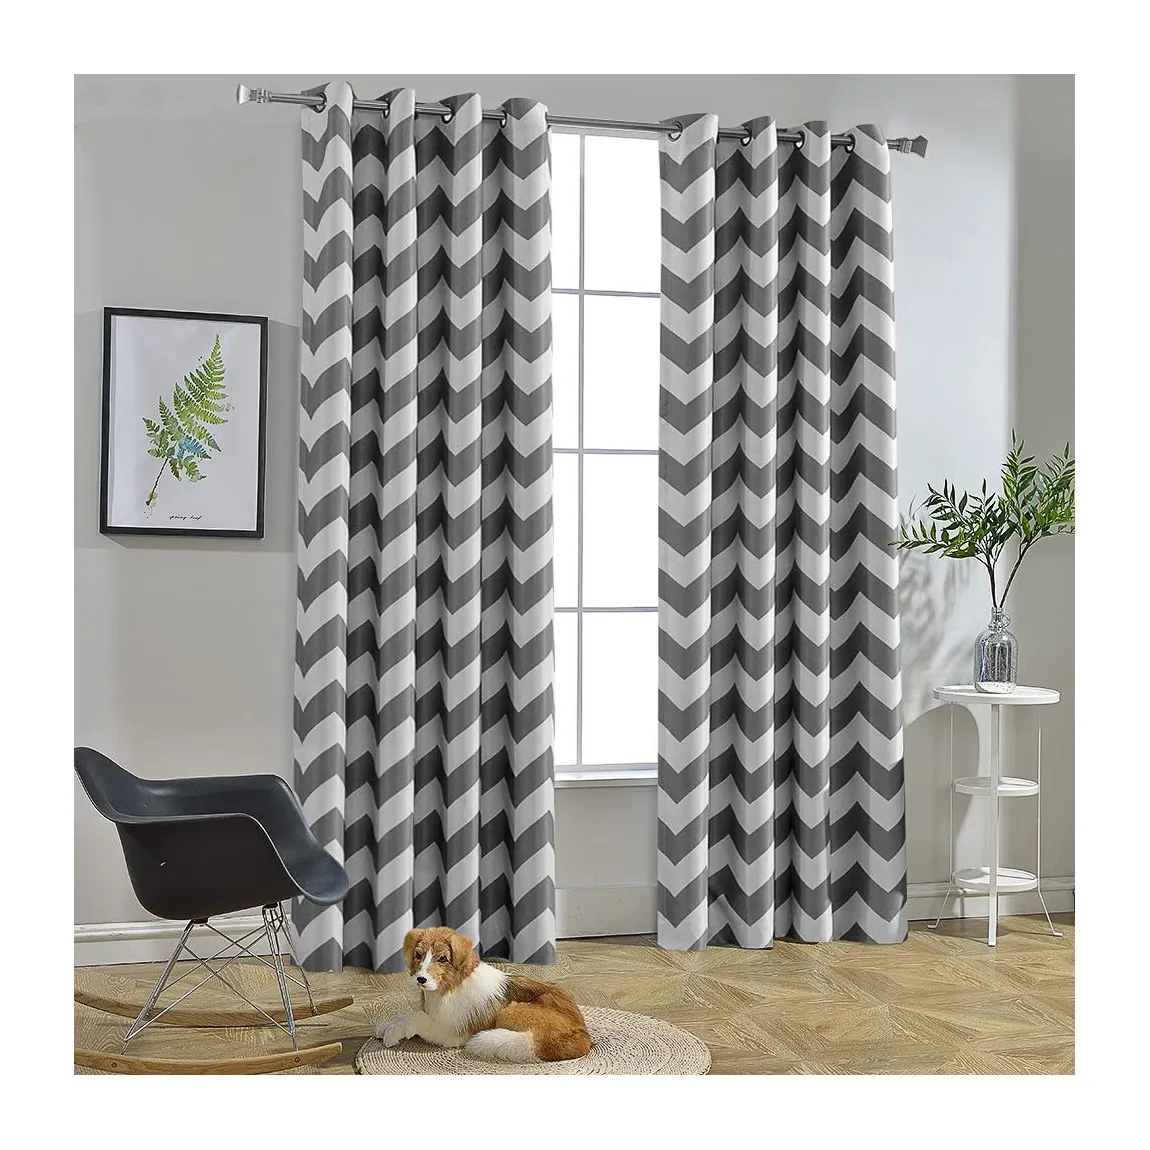 Low Price Supply Hot Sale Cortina Polyester curtain fabric Geometric Pattern Printed Blackout Curtain for the Living Room